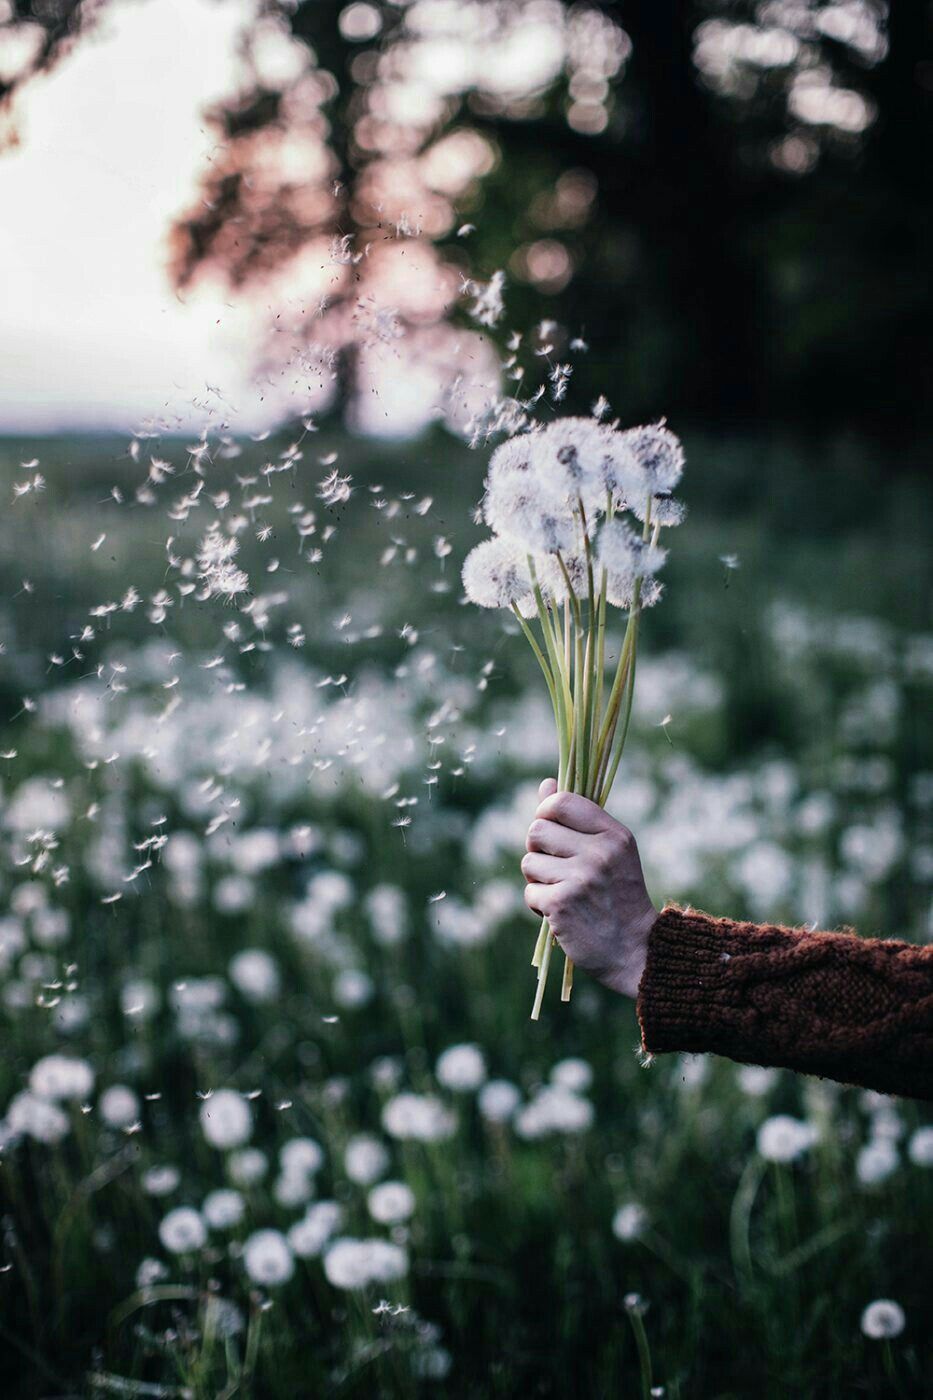 A person holding a bunch of dandelions in a field - Dandelions